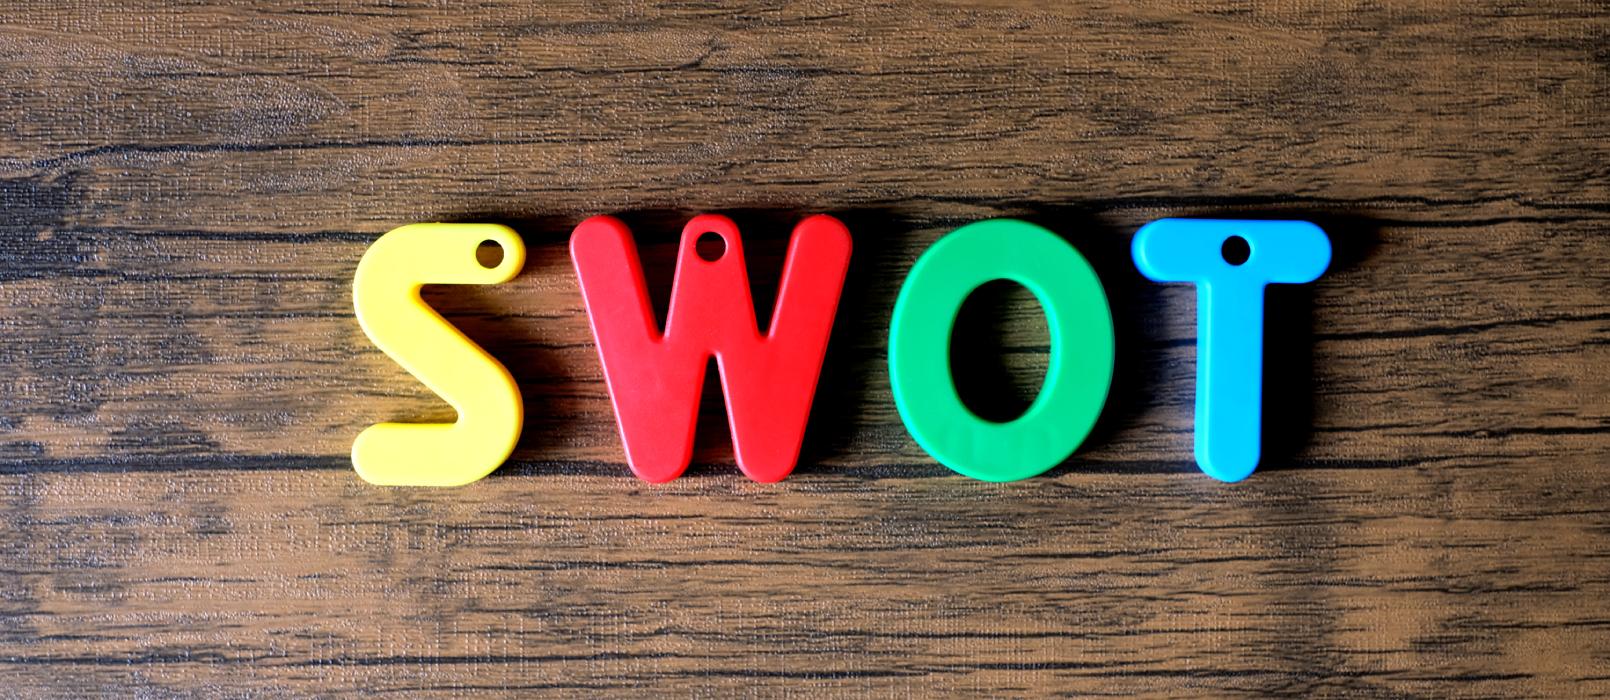 SWOT analysis - what is it and how to apply it in a company?